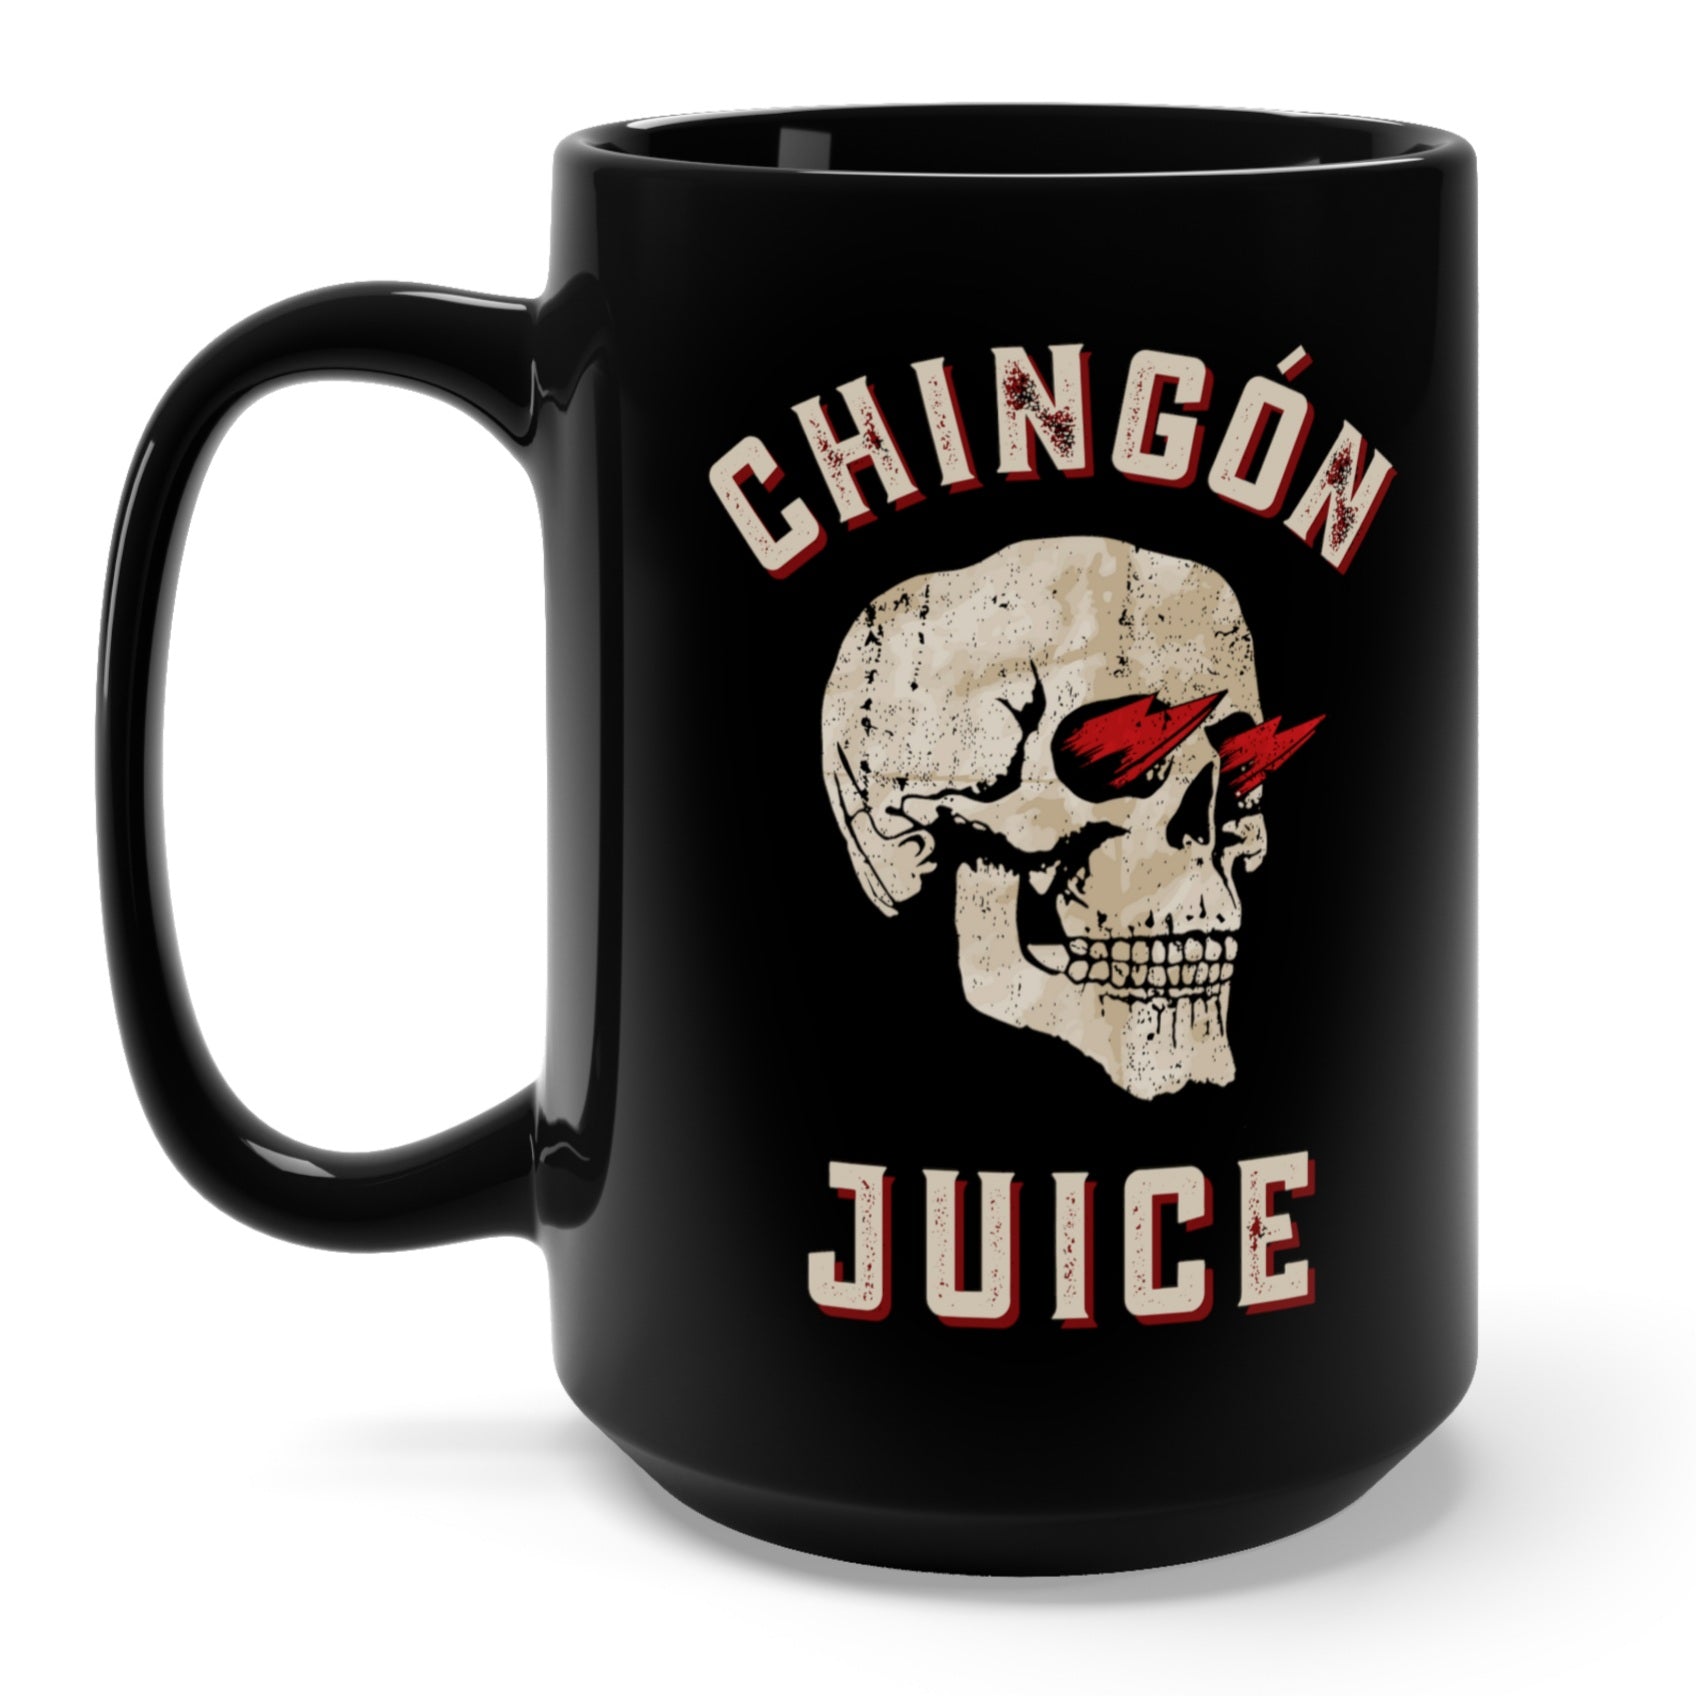 Funny tall black spanish gift mug for latinos with a graphic of a skull with fire in its eyes and 'Chingon Juice' written in vintage-style lettering